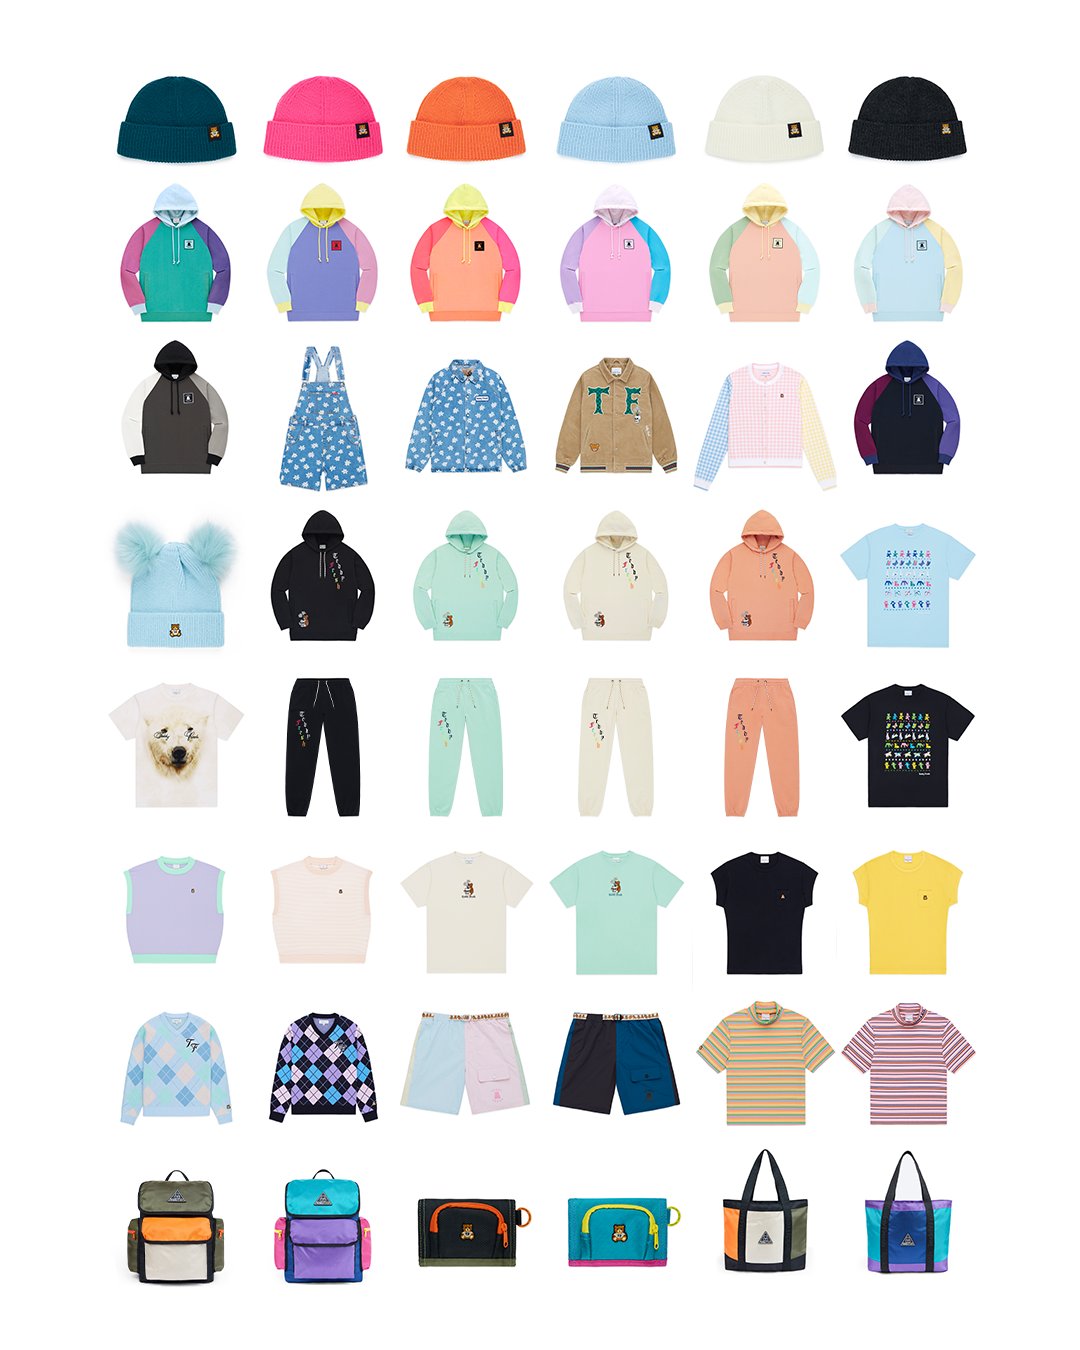 Teddy Fresh on X: Teddy Fresh May 2021 collection available now